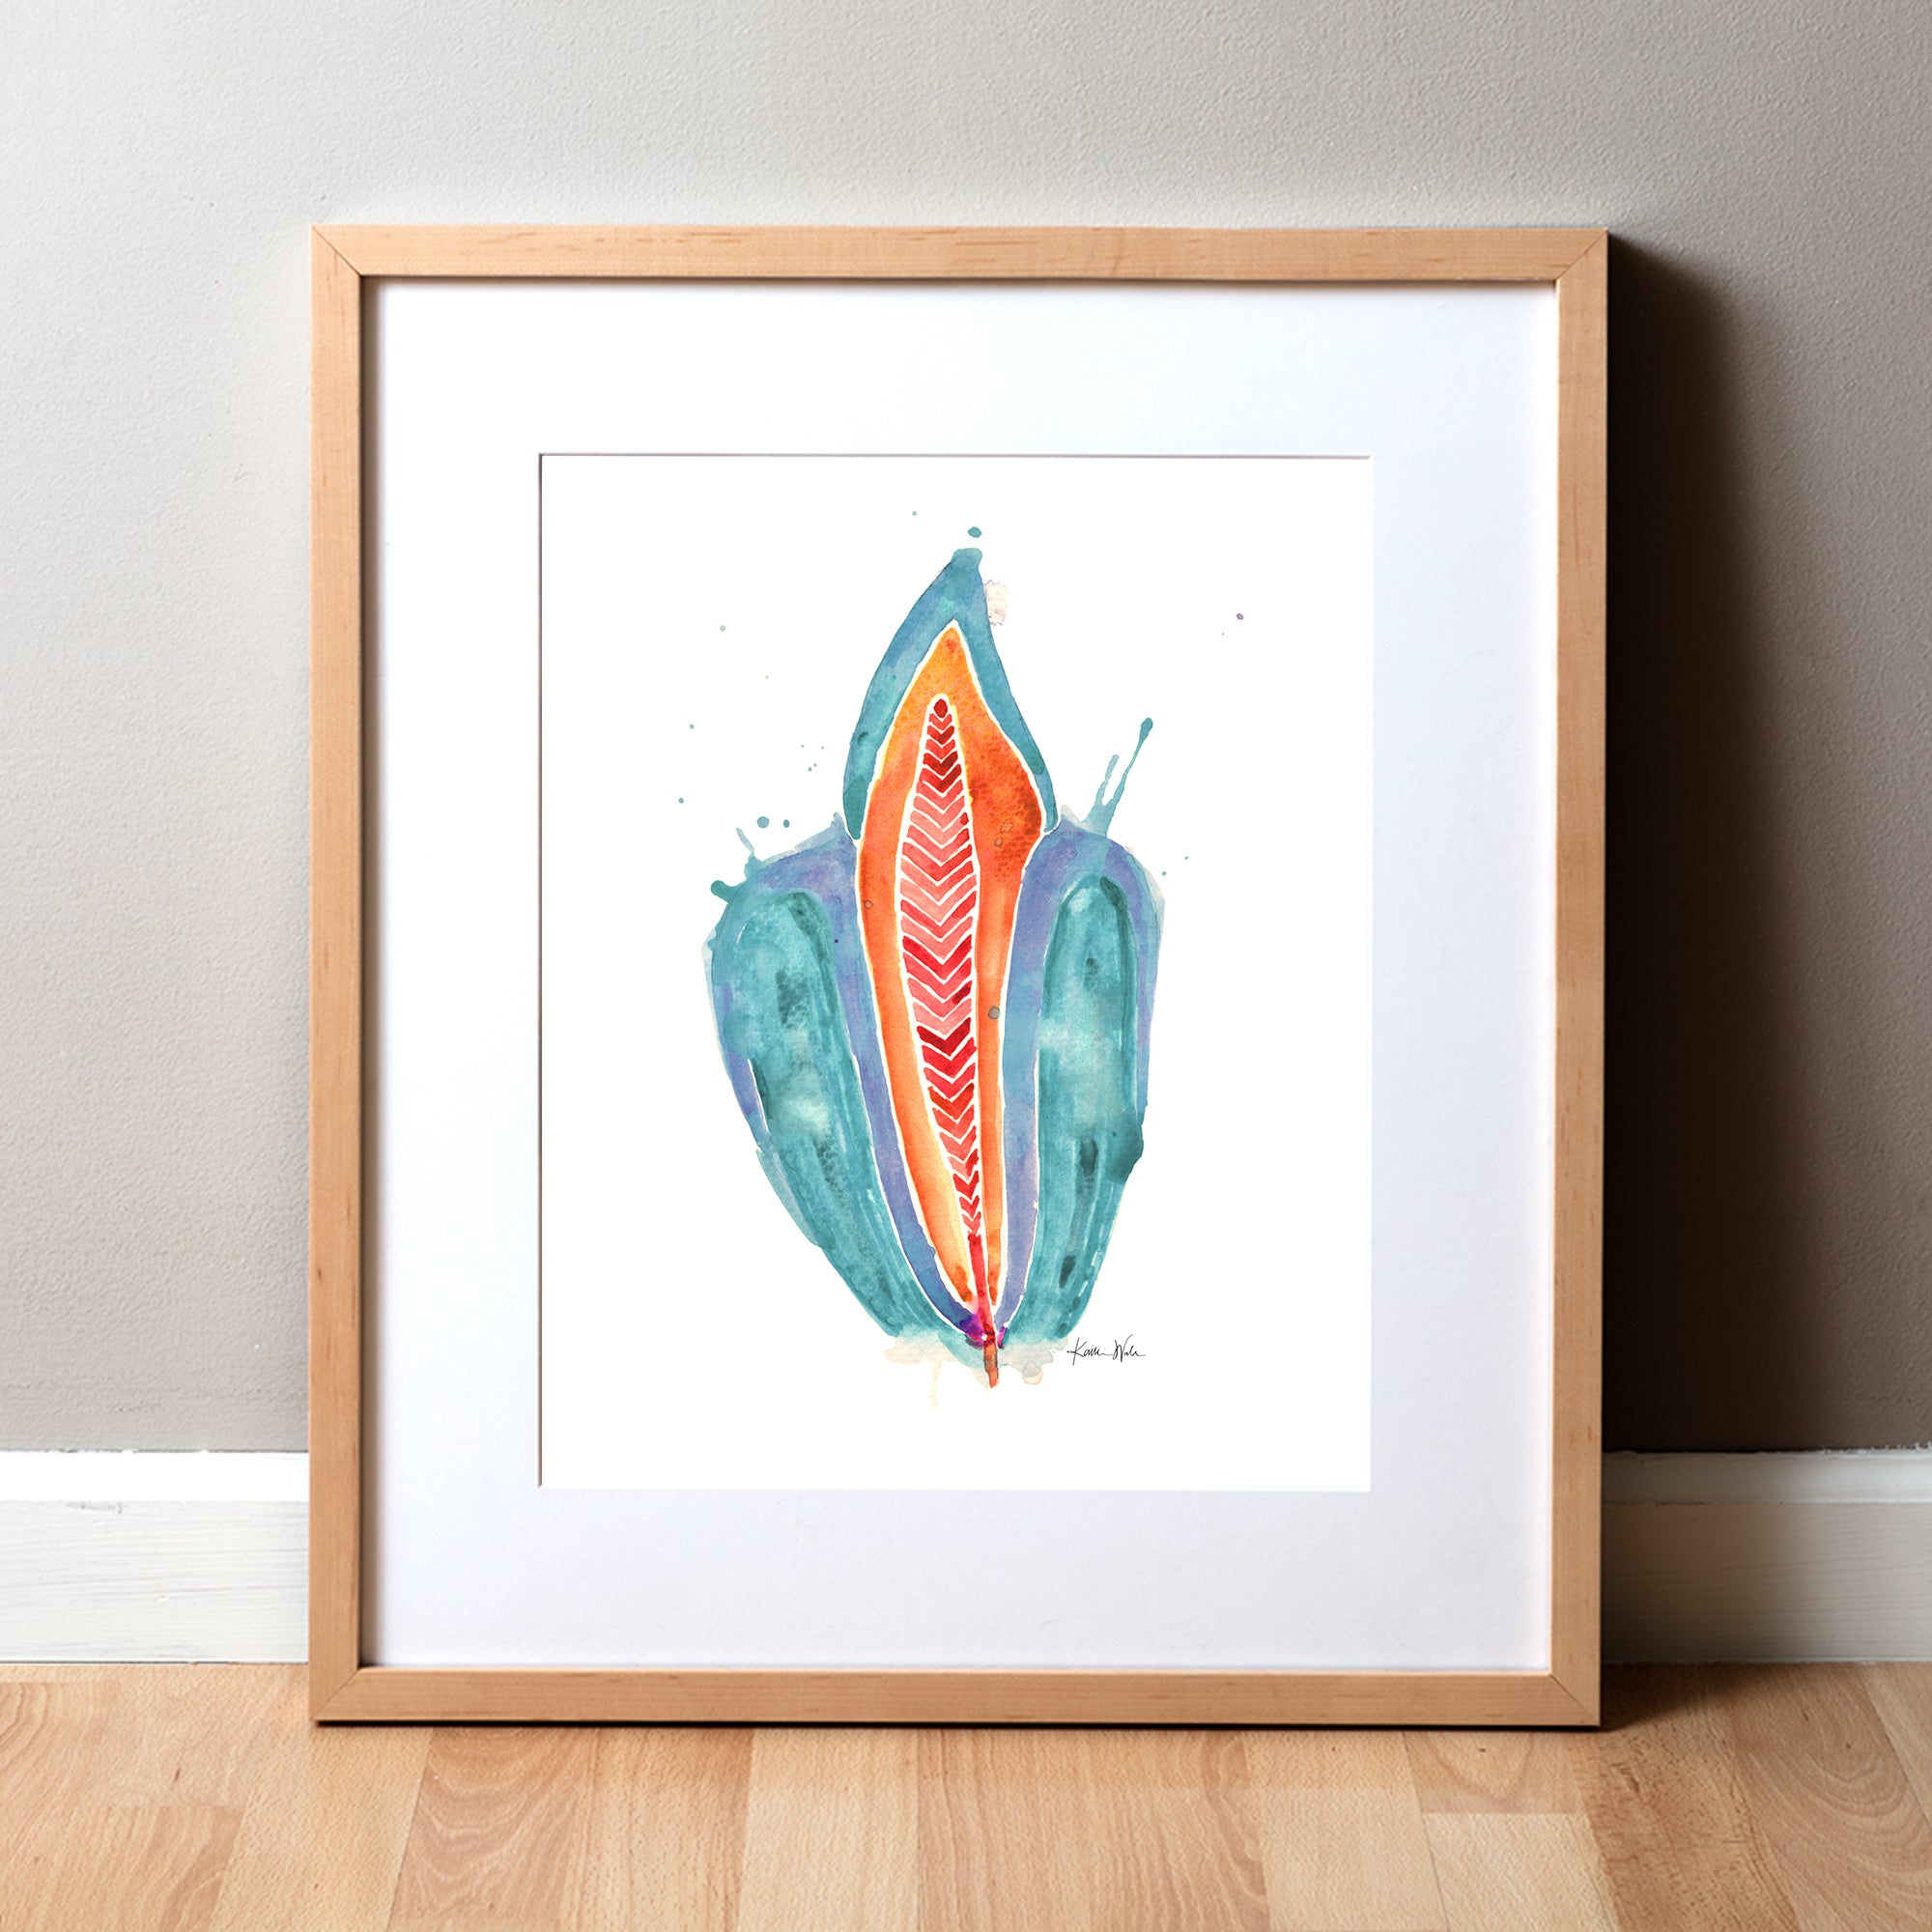 Framed watercolor painting of an abstract incisor in teal, orange, and red.